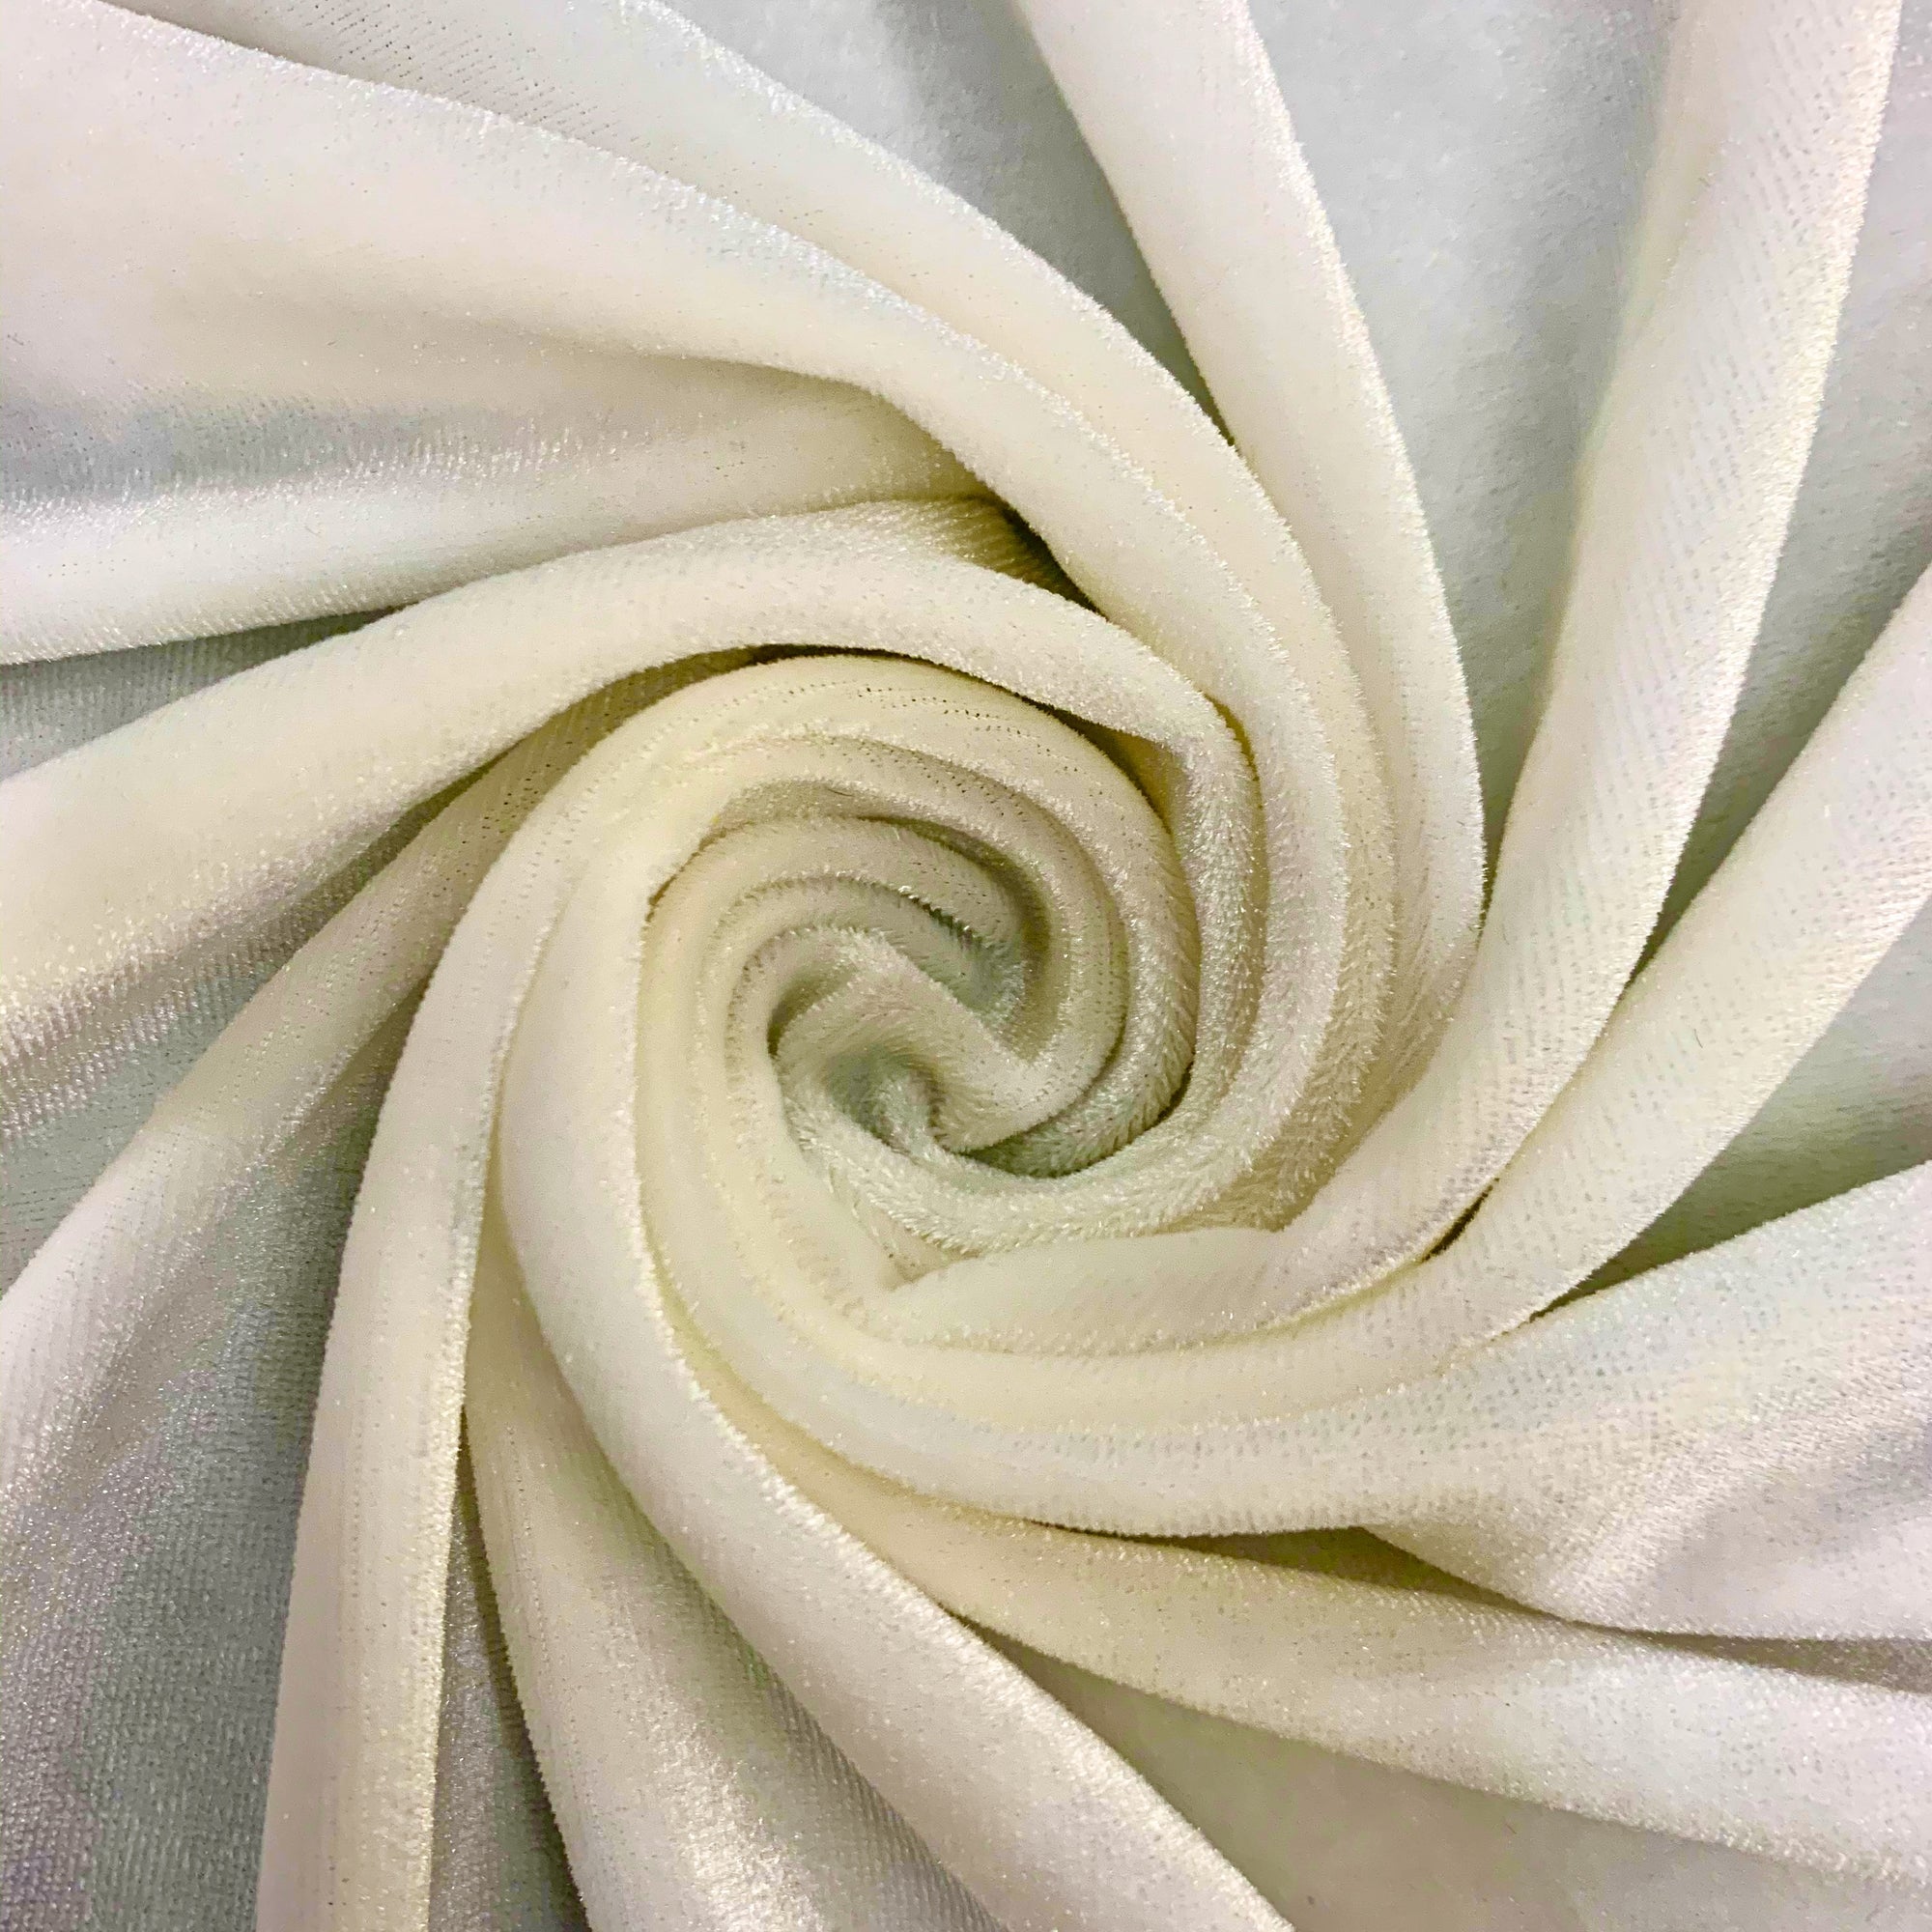 Princess IVORY Polyester Stretch Velvet Fabric for Bows, Top Knots, Head Wraps, Scrunchies, Clothes, Costumes, Crafts